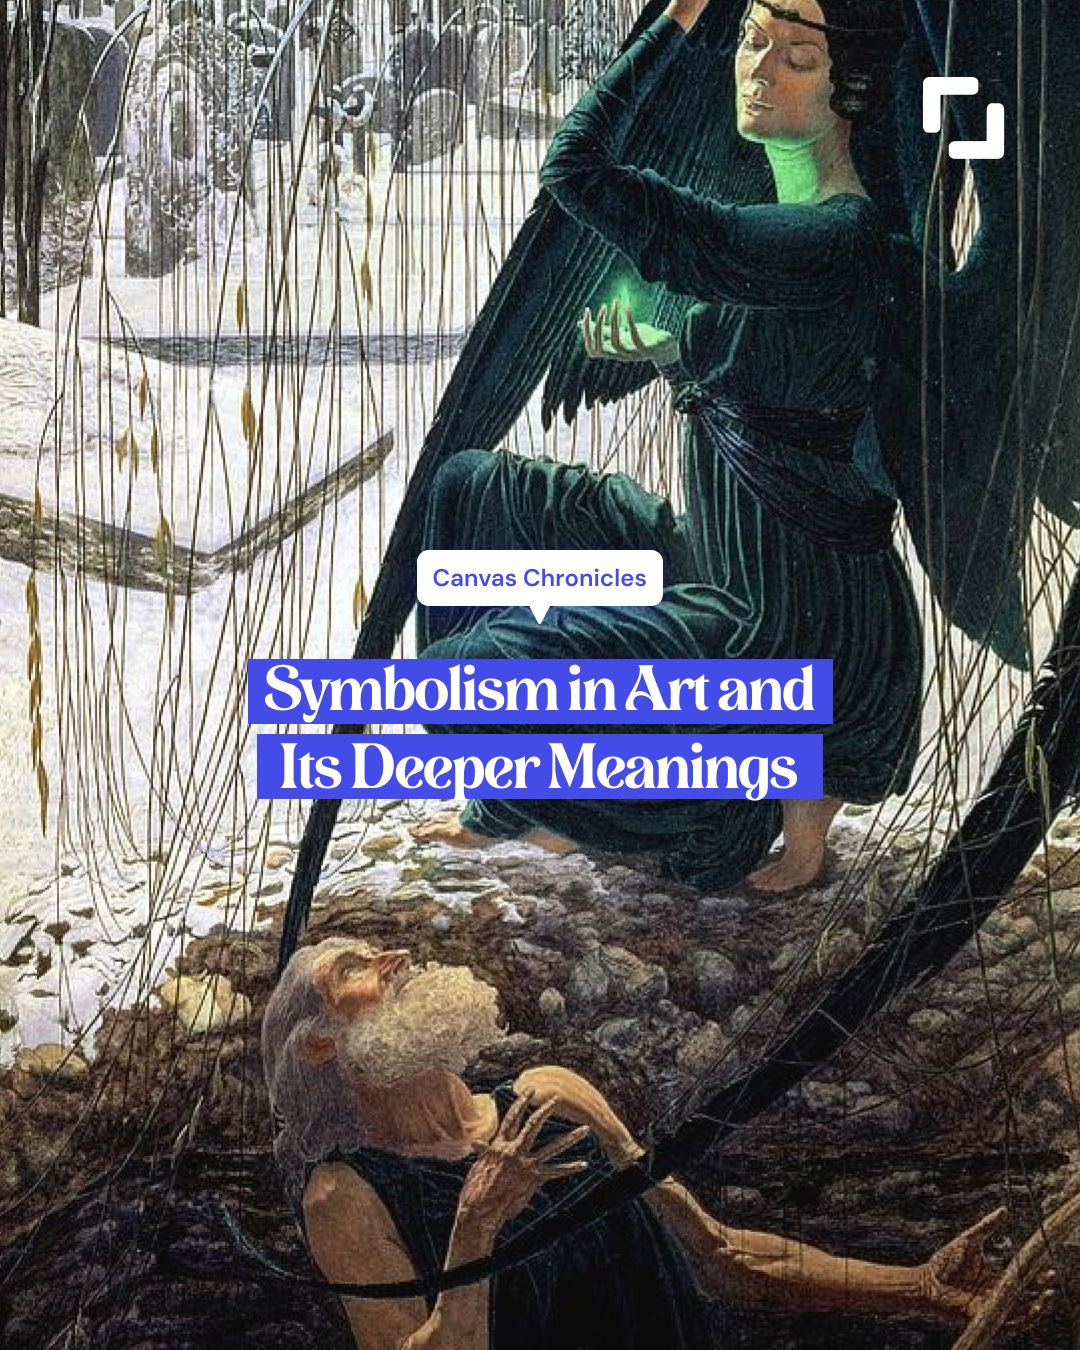 Symbolism in Art and Its Deeper Meanings